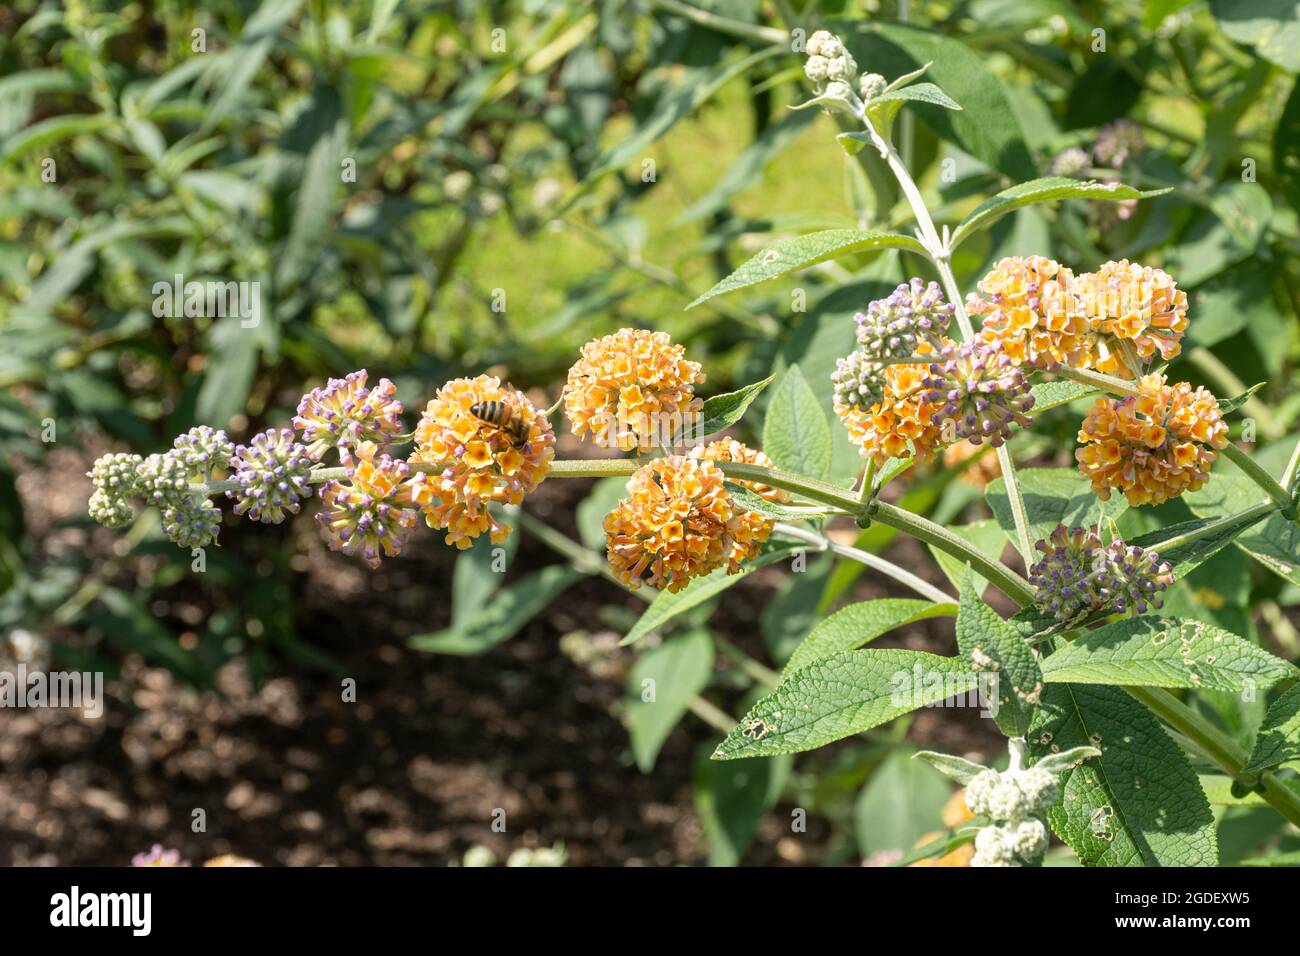 Buddleja weyeriana 'Golden Glow'  (buddleia variety), known as a butterfly bush, in flower during august or summer, UK Stock Photo